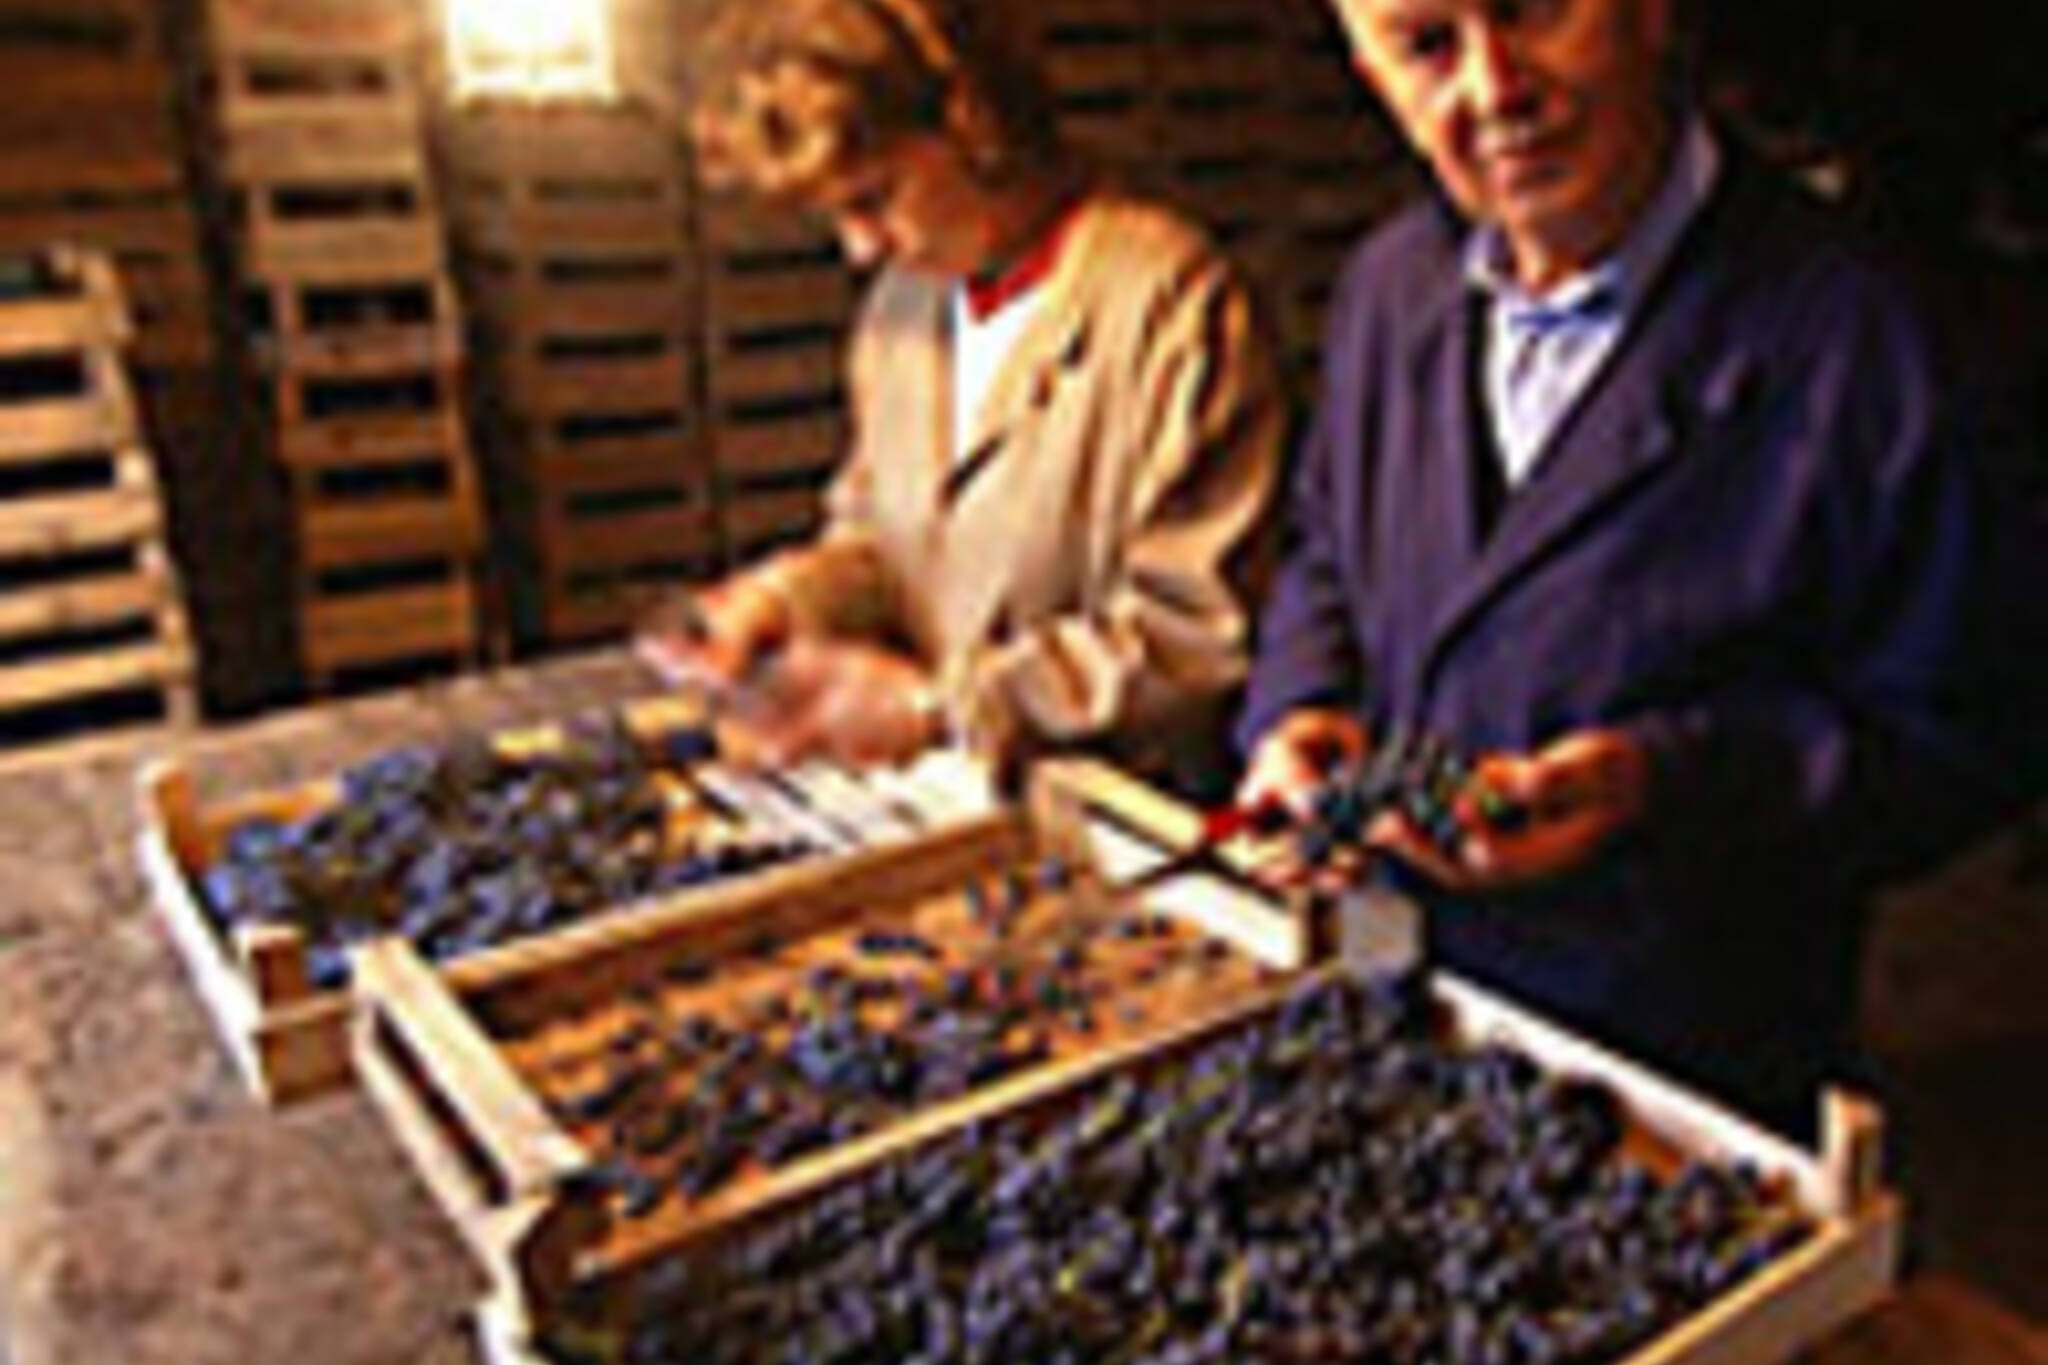 Guiseppe Quintarelli (right) making his magic. (Image from www.winephotos.com)